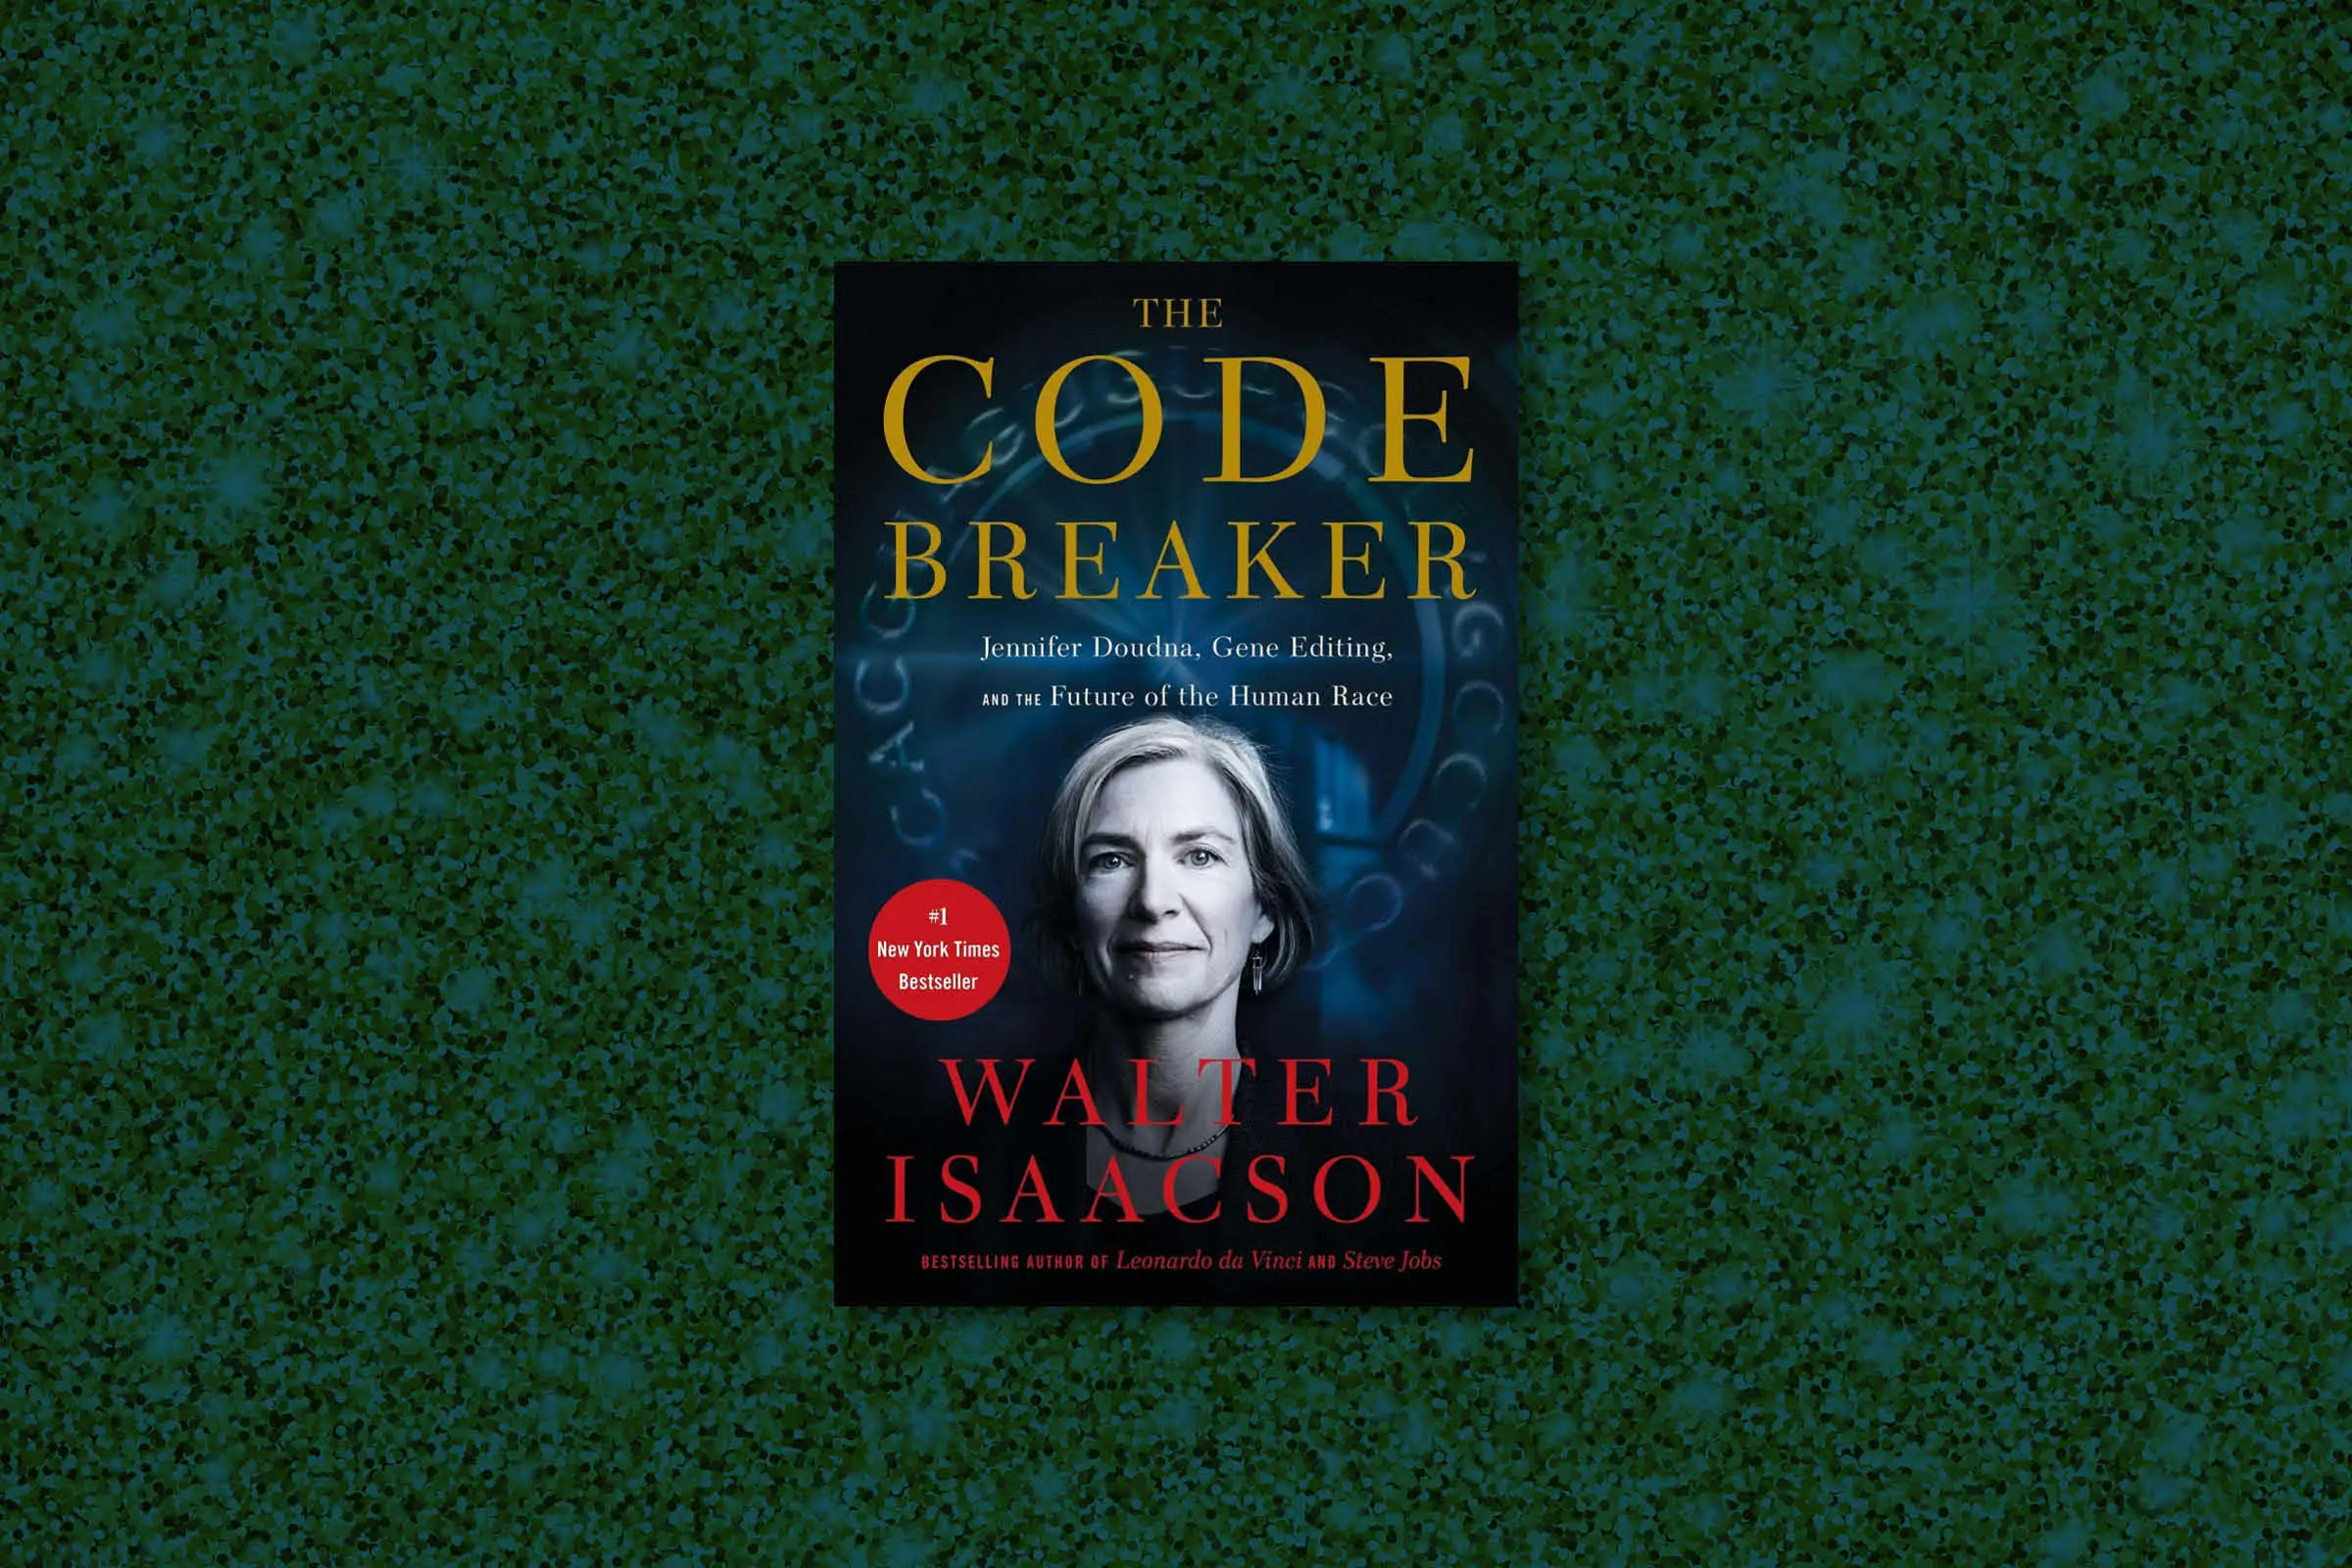 The Code Breaker: Jennifer Doudna, Gene Editing, and the Future of the Human Race - A Fascinating Exploration of Science and Ethics